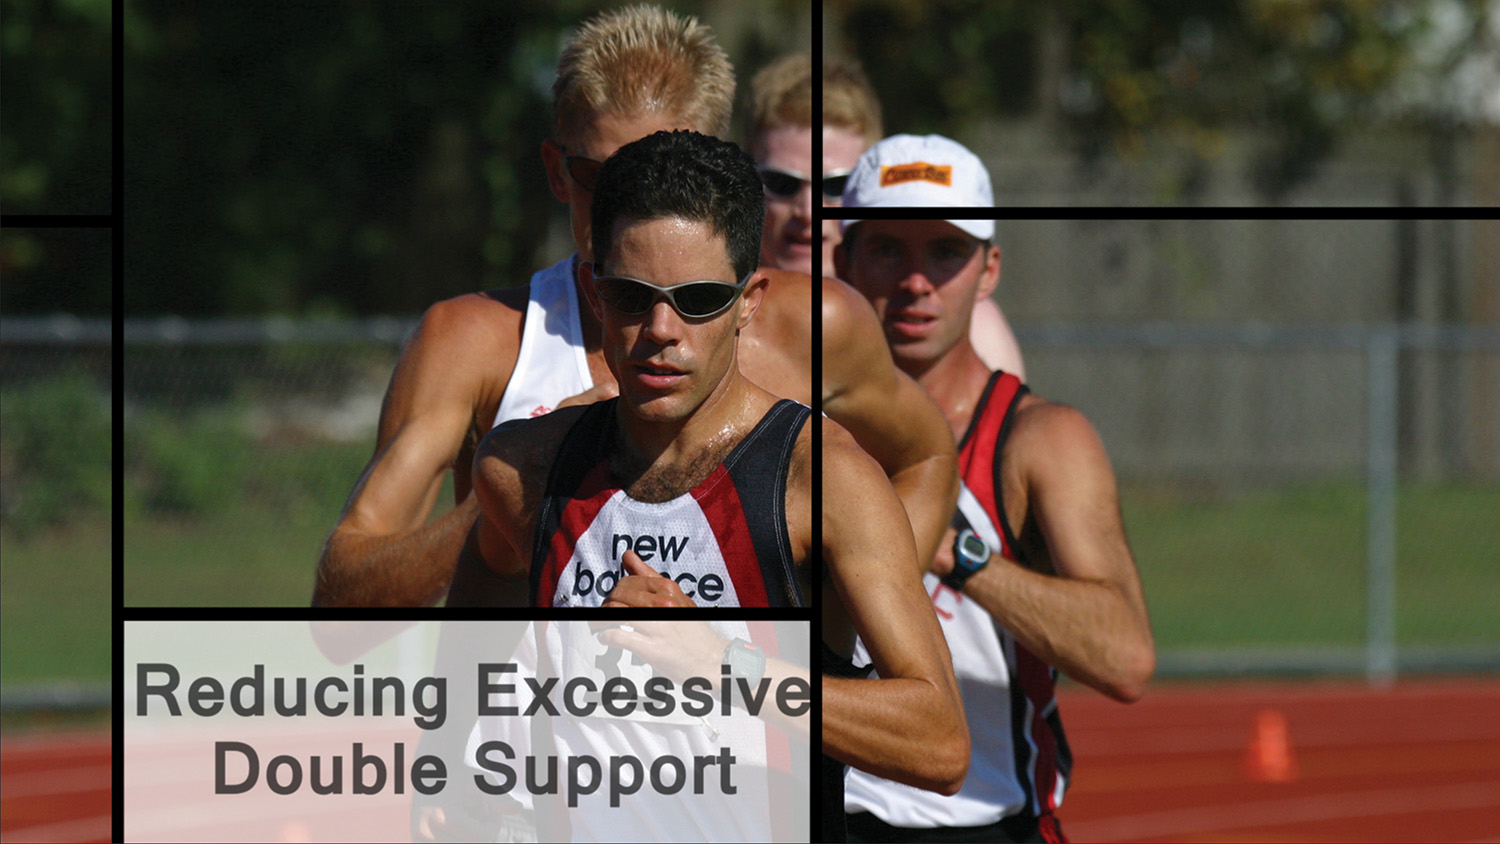 Reducing Excessive Double Support